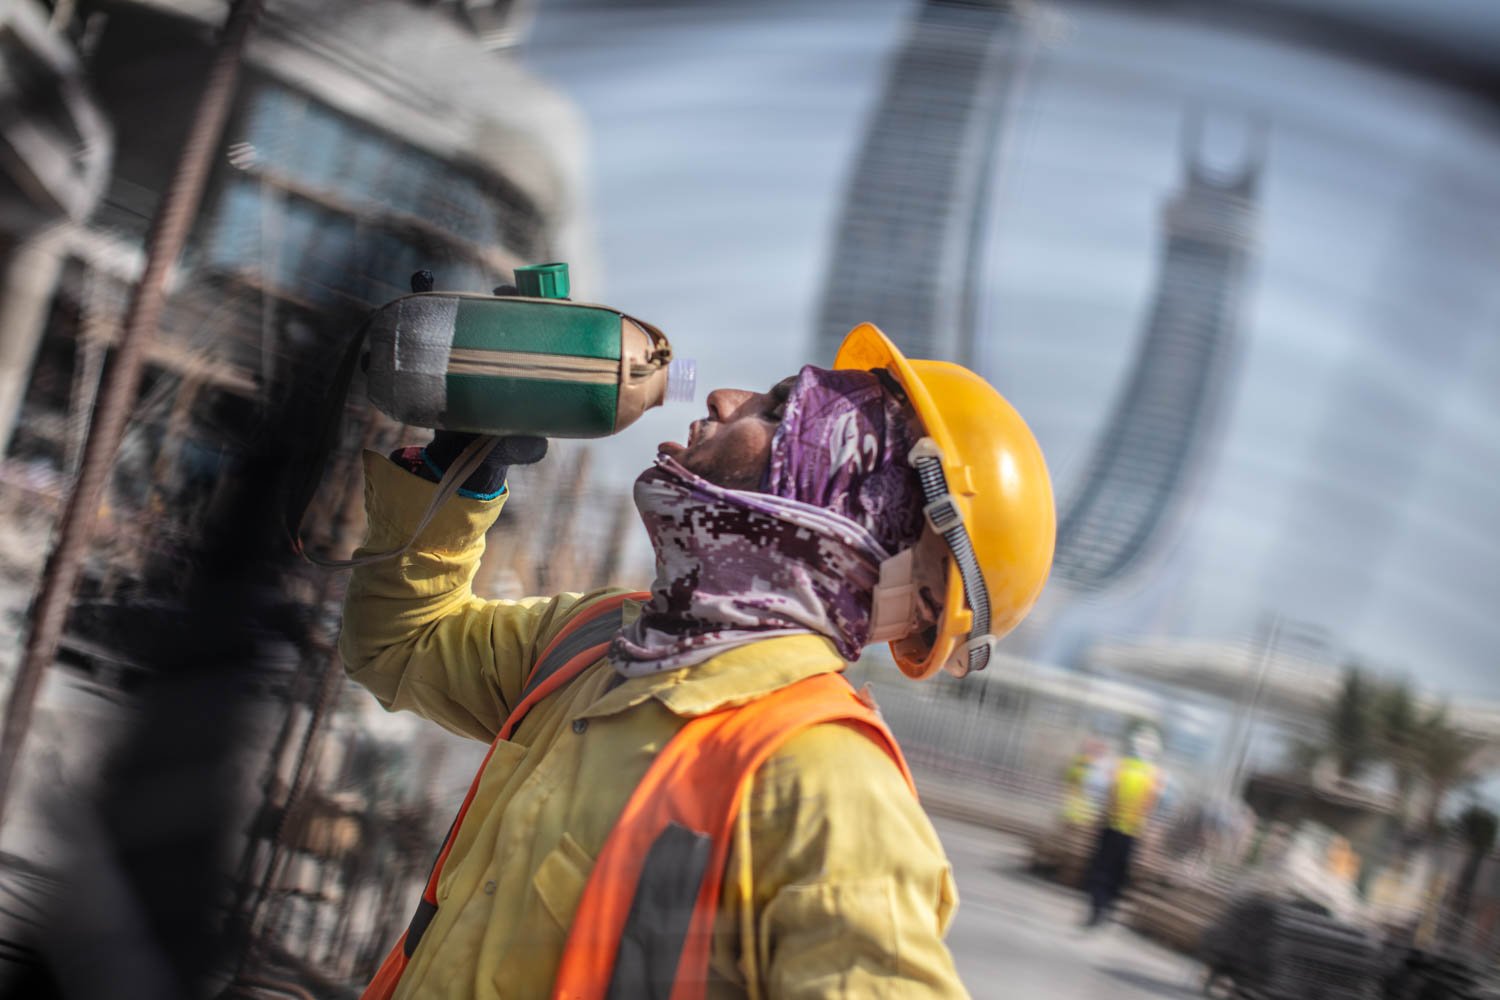  A worker drinks water at a construction site in Lusail City, Qatar on August 18, 2022. 